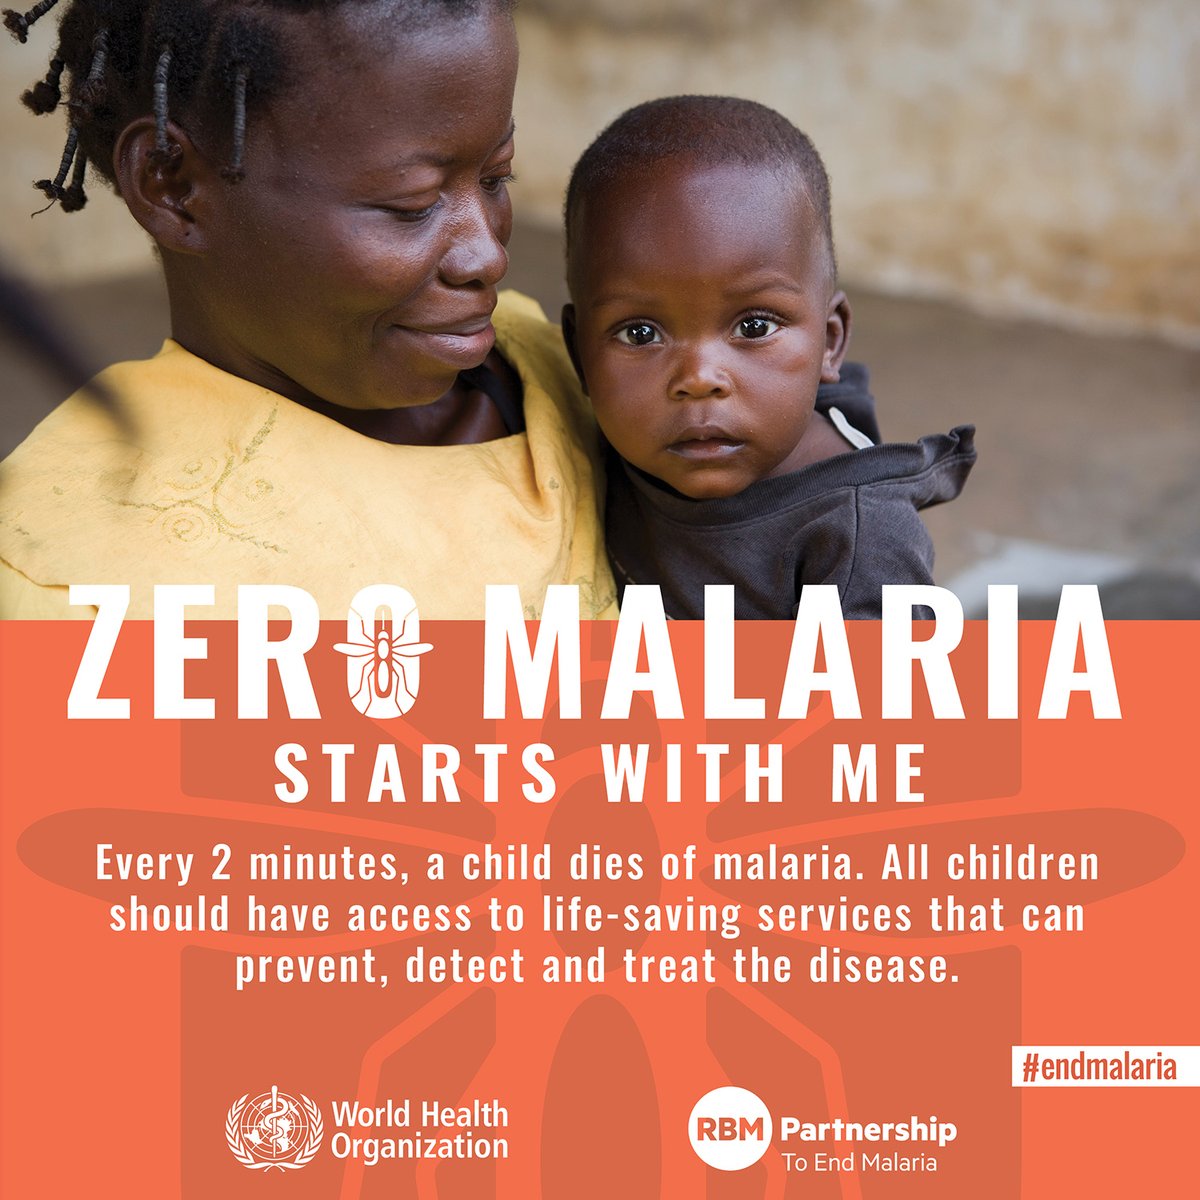 Today is  #WorldMalariaDay #Malaria still kills  child every  minutes.No children should die because they cannot access life-saving services to prevent, detect & treat the disease.Reaching  malaria is possible – Together we can  #EndMalaria  https://bit.ly/32uKPFH 